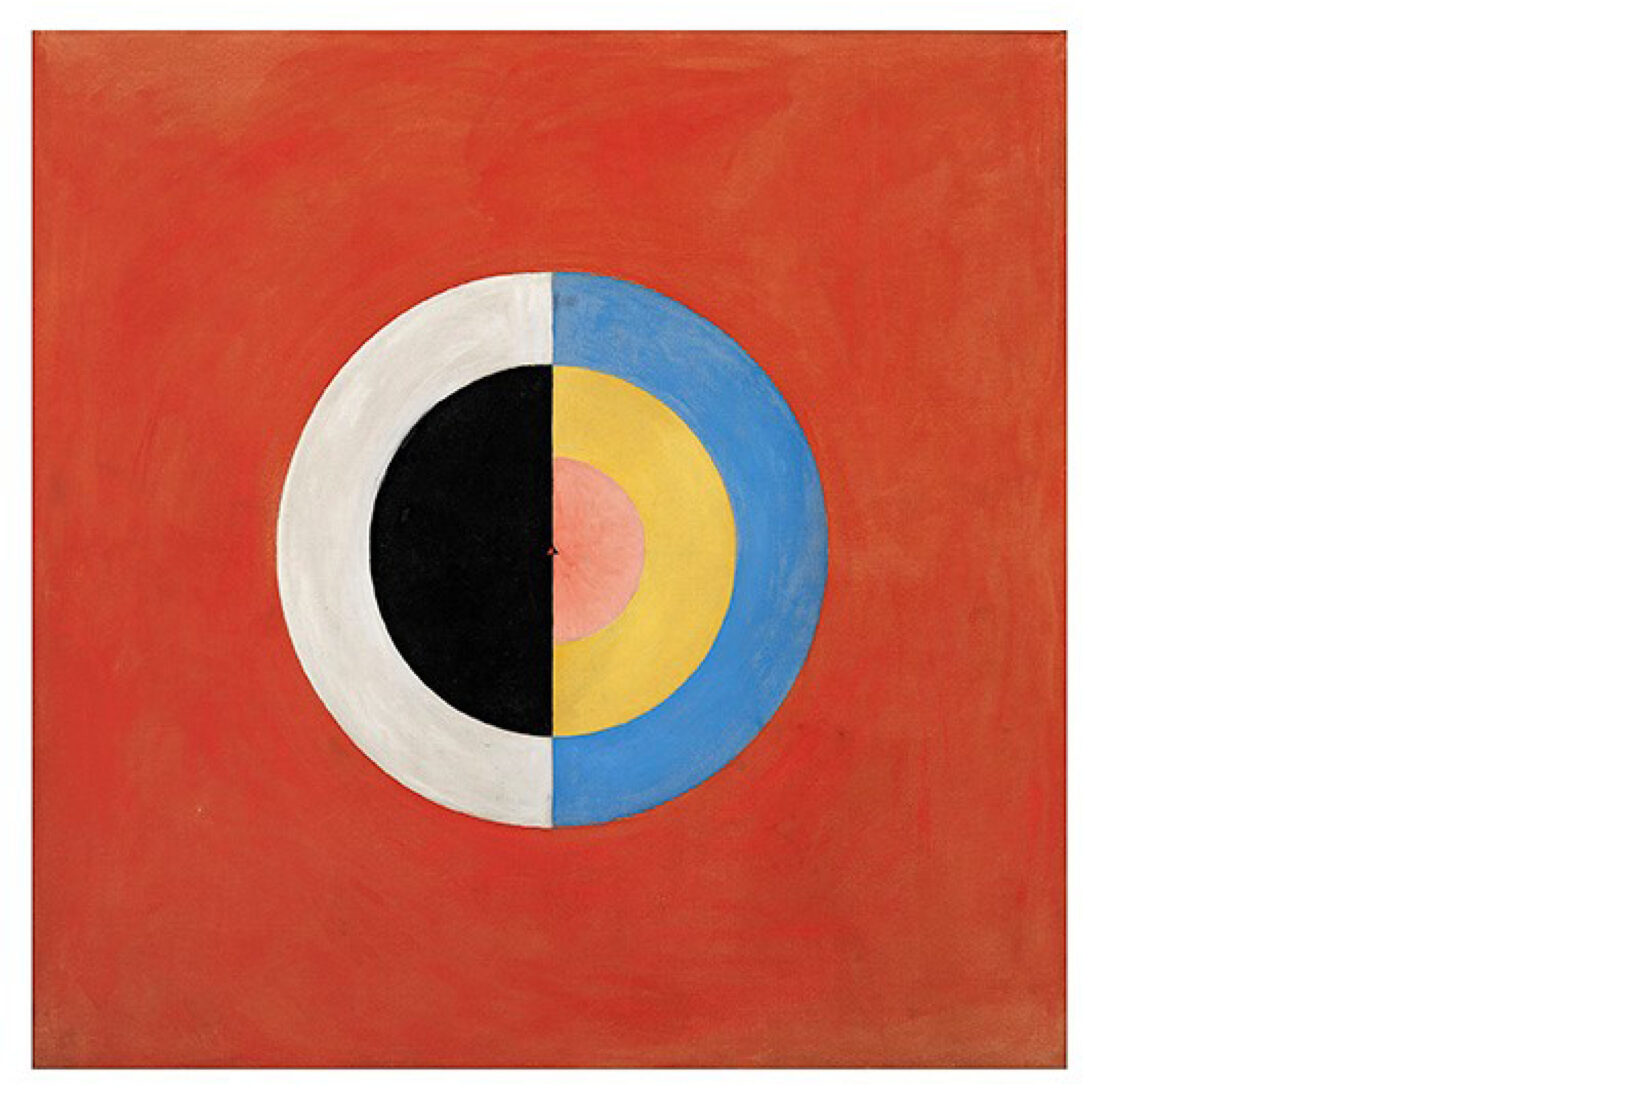 Abstract work by Hilma af Klint